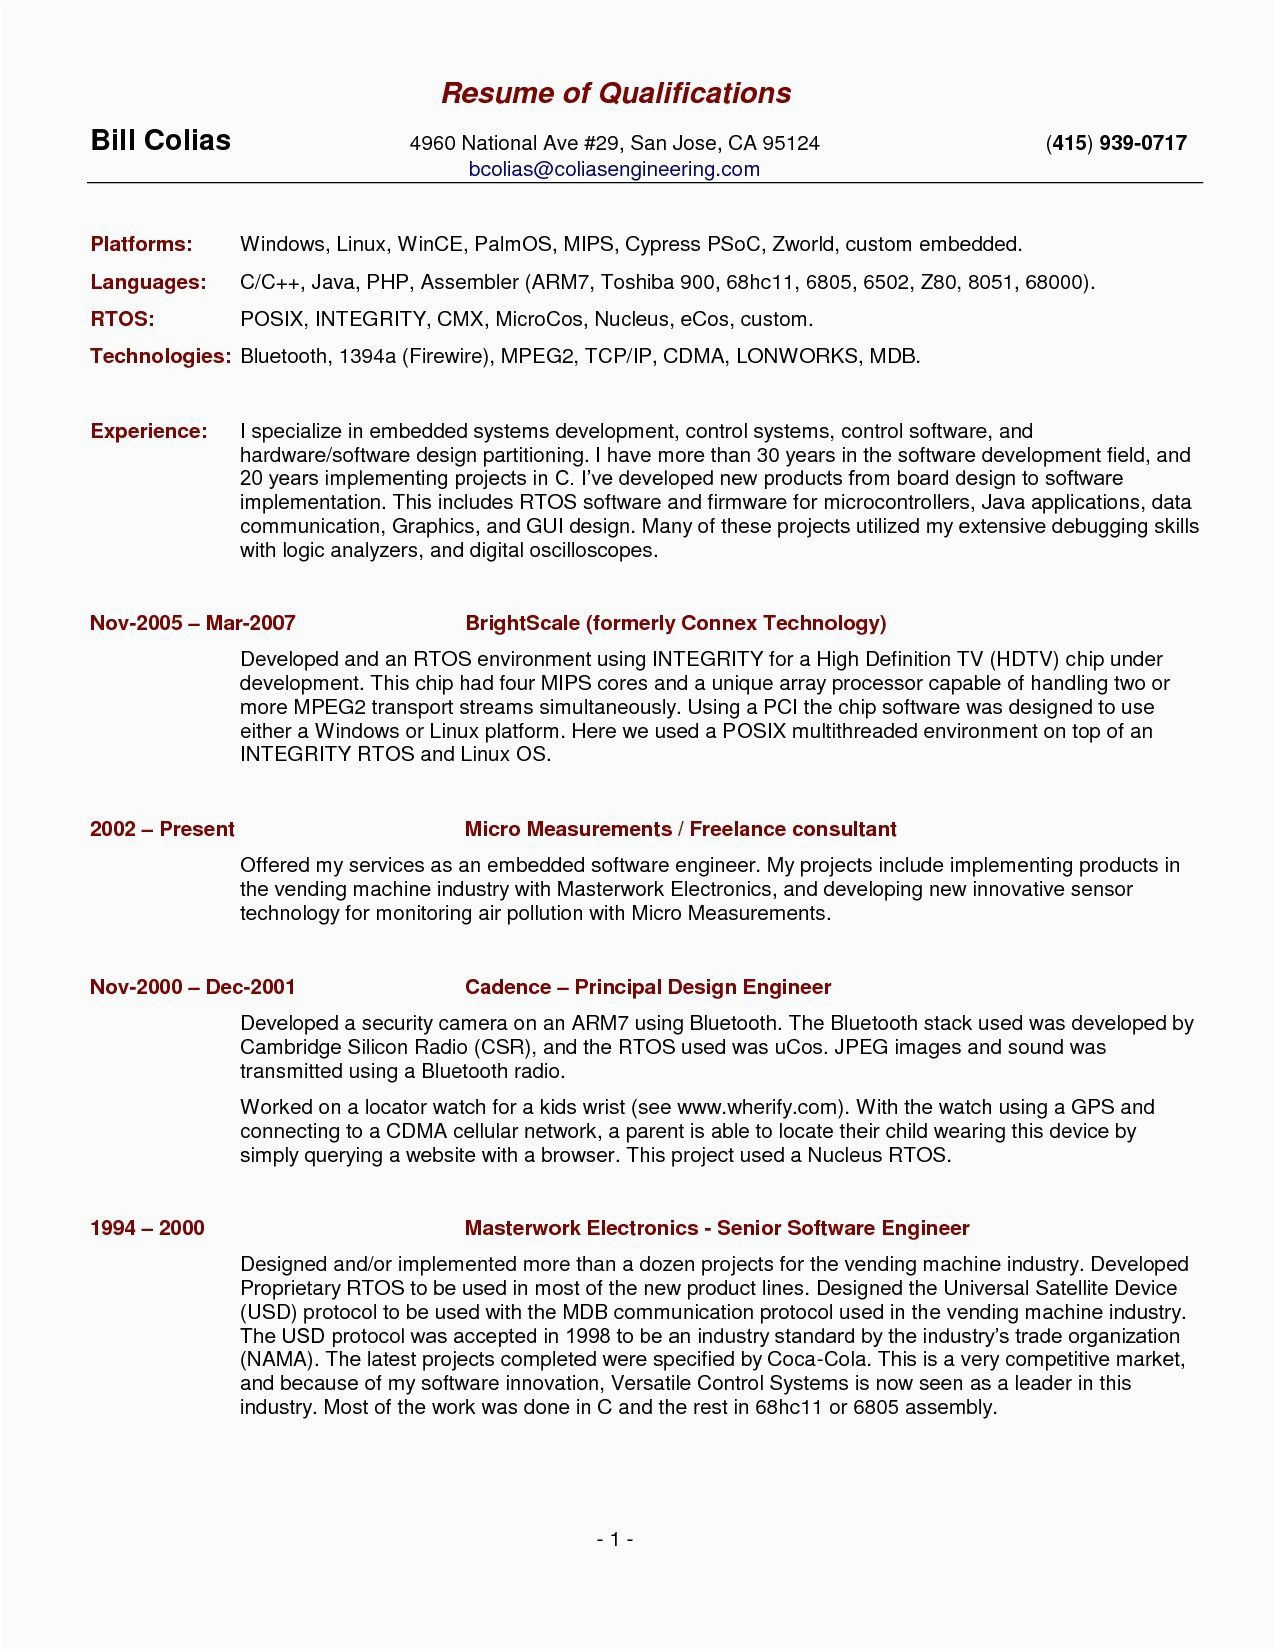 Sample Skills and Qualifications In Resume Resume format Qualifications with Images